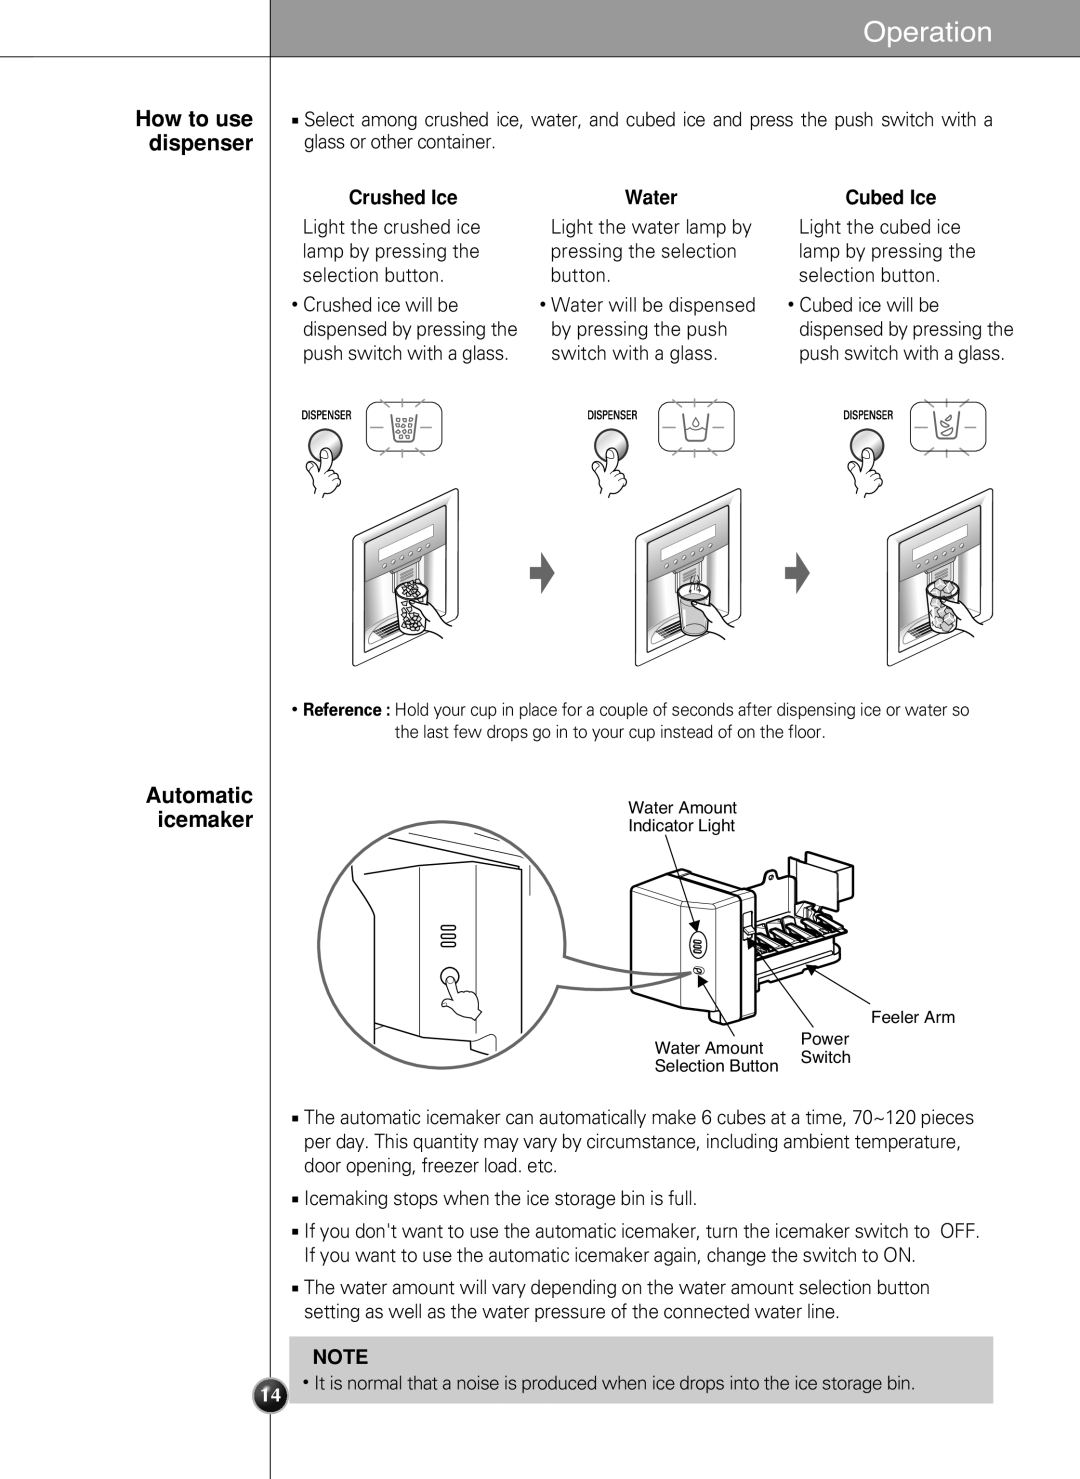 LG Electronics LSC 21943ST manual Operation, How to use dispenser, Automatic icemaker, Crushed Ice, Water 